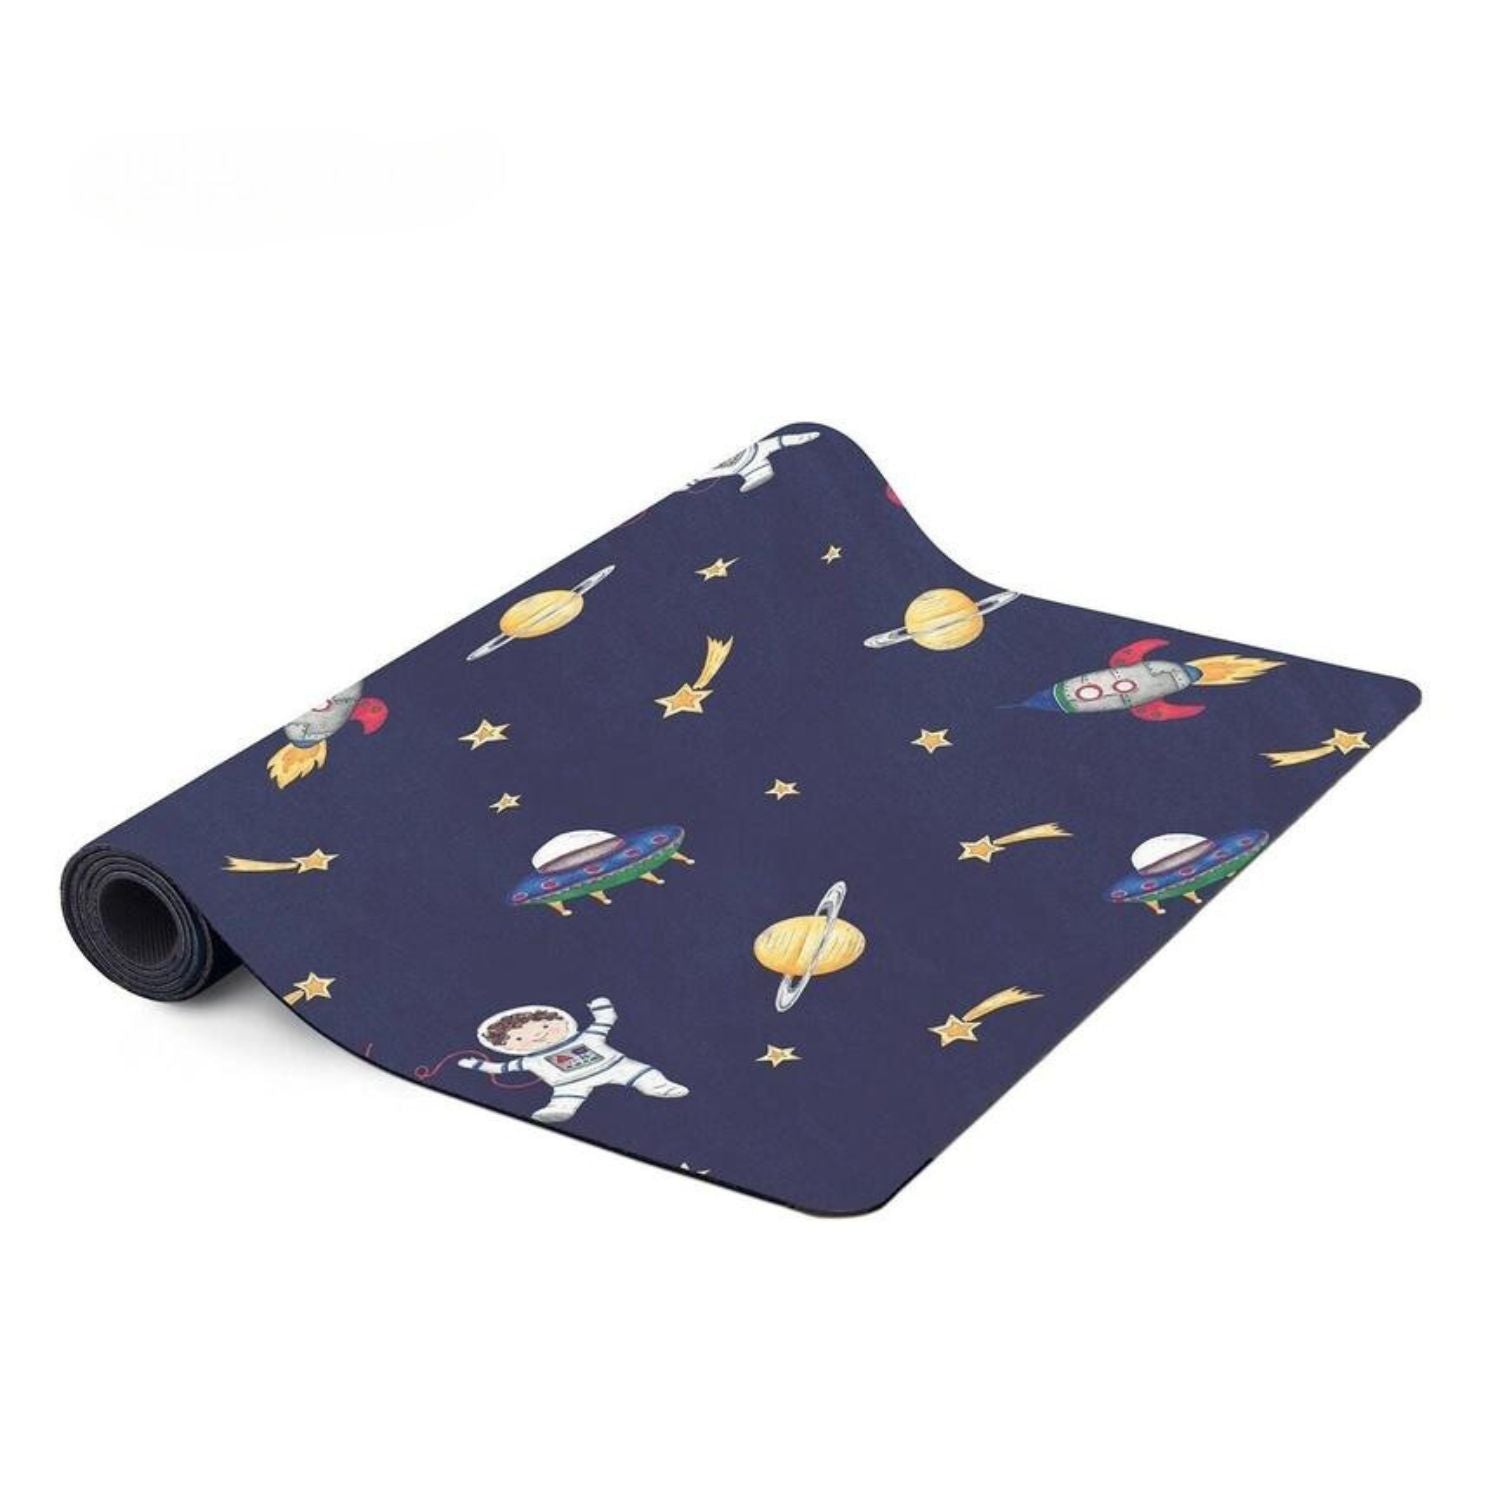 Space Printed Kids Yoga Mat | Eco-Friendly Printed Mat for Children